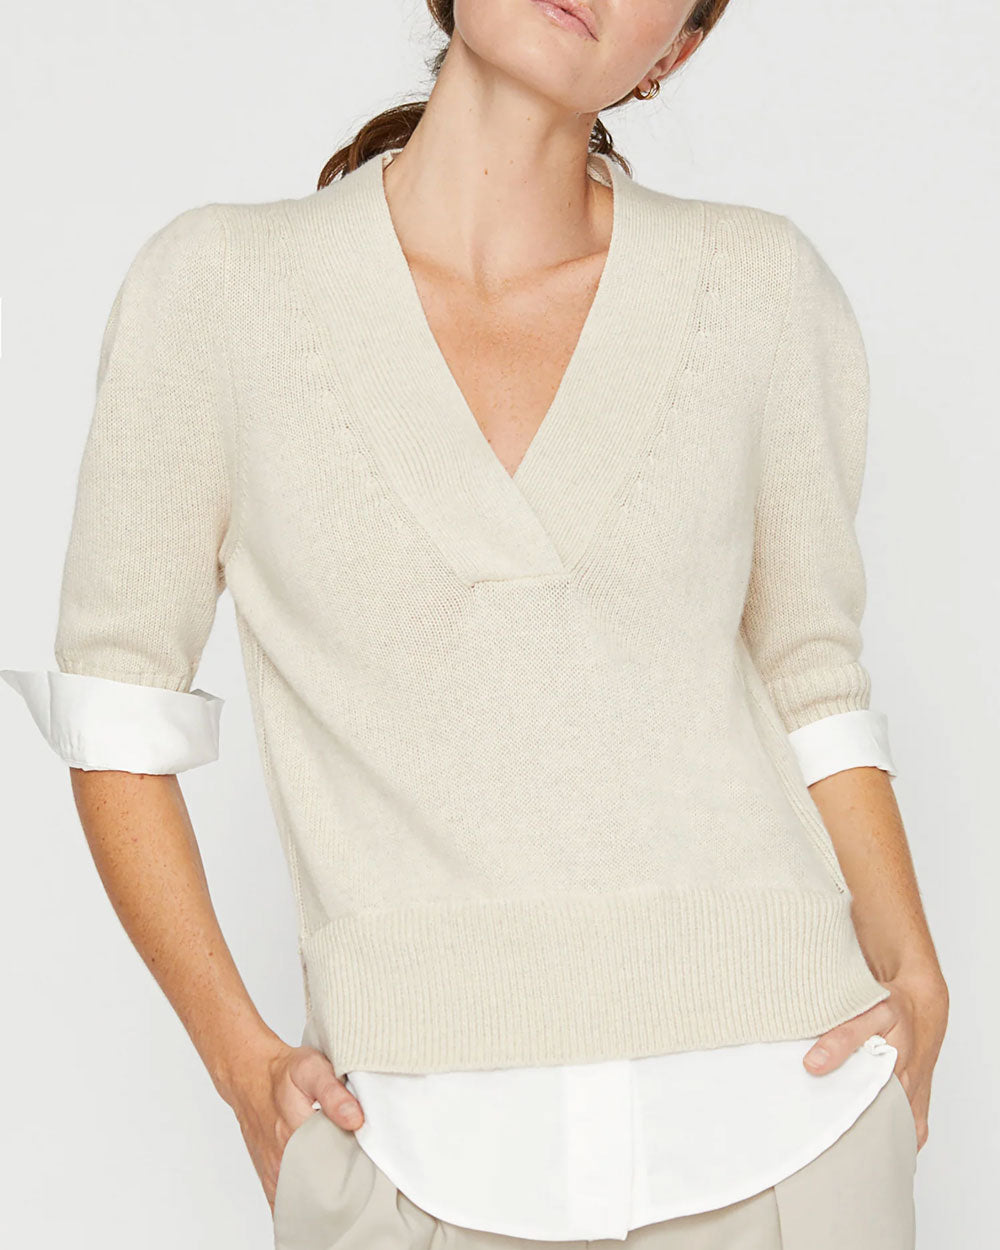 Bisque Lucie Layered V Looker